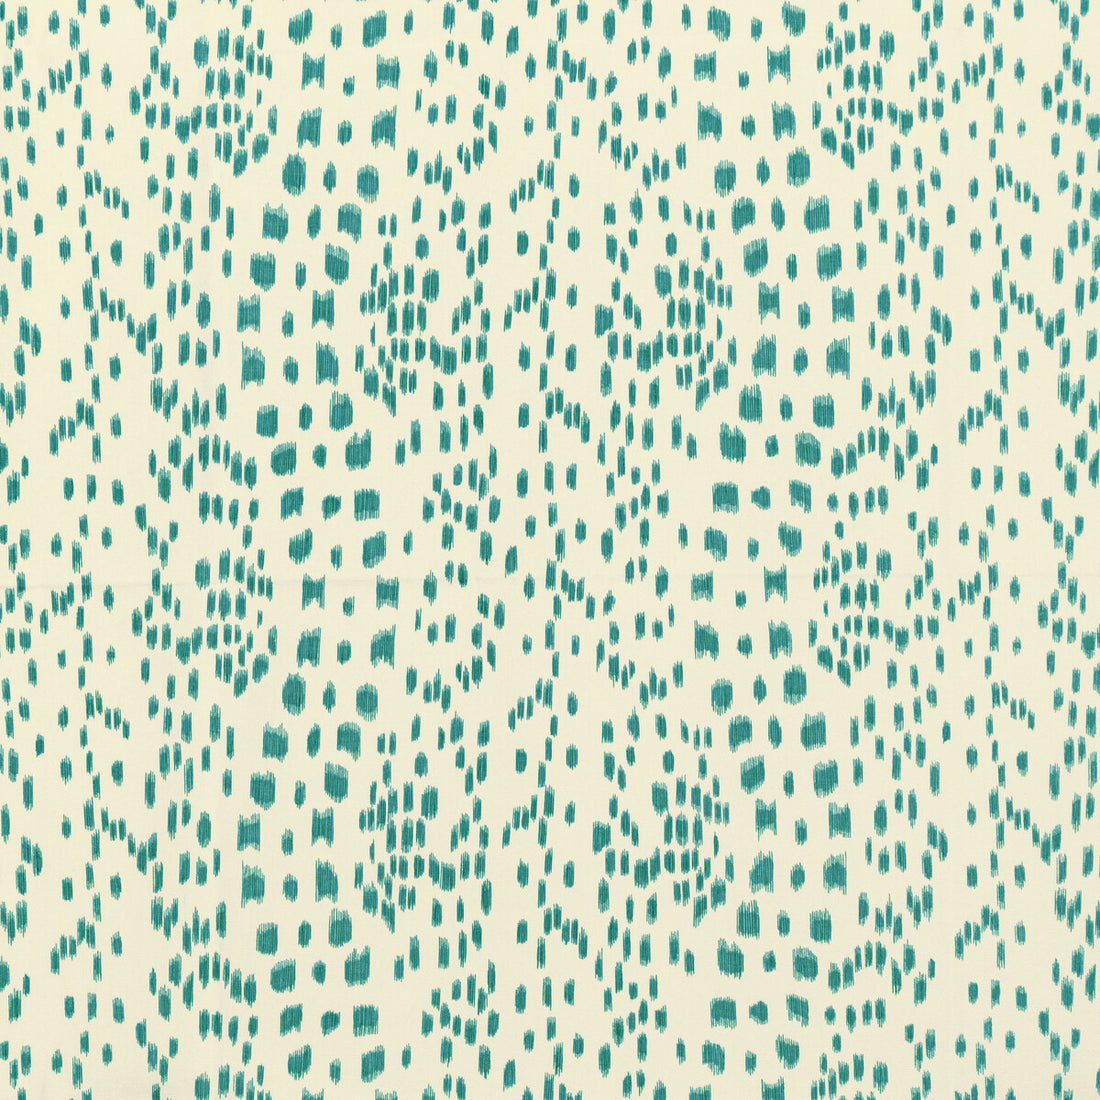 Les Touches II fabric in teal color - pattern 8020131.13.0 - by Brunschwig &amp; Fils in the En Vacances II collection